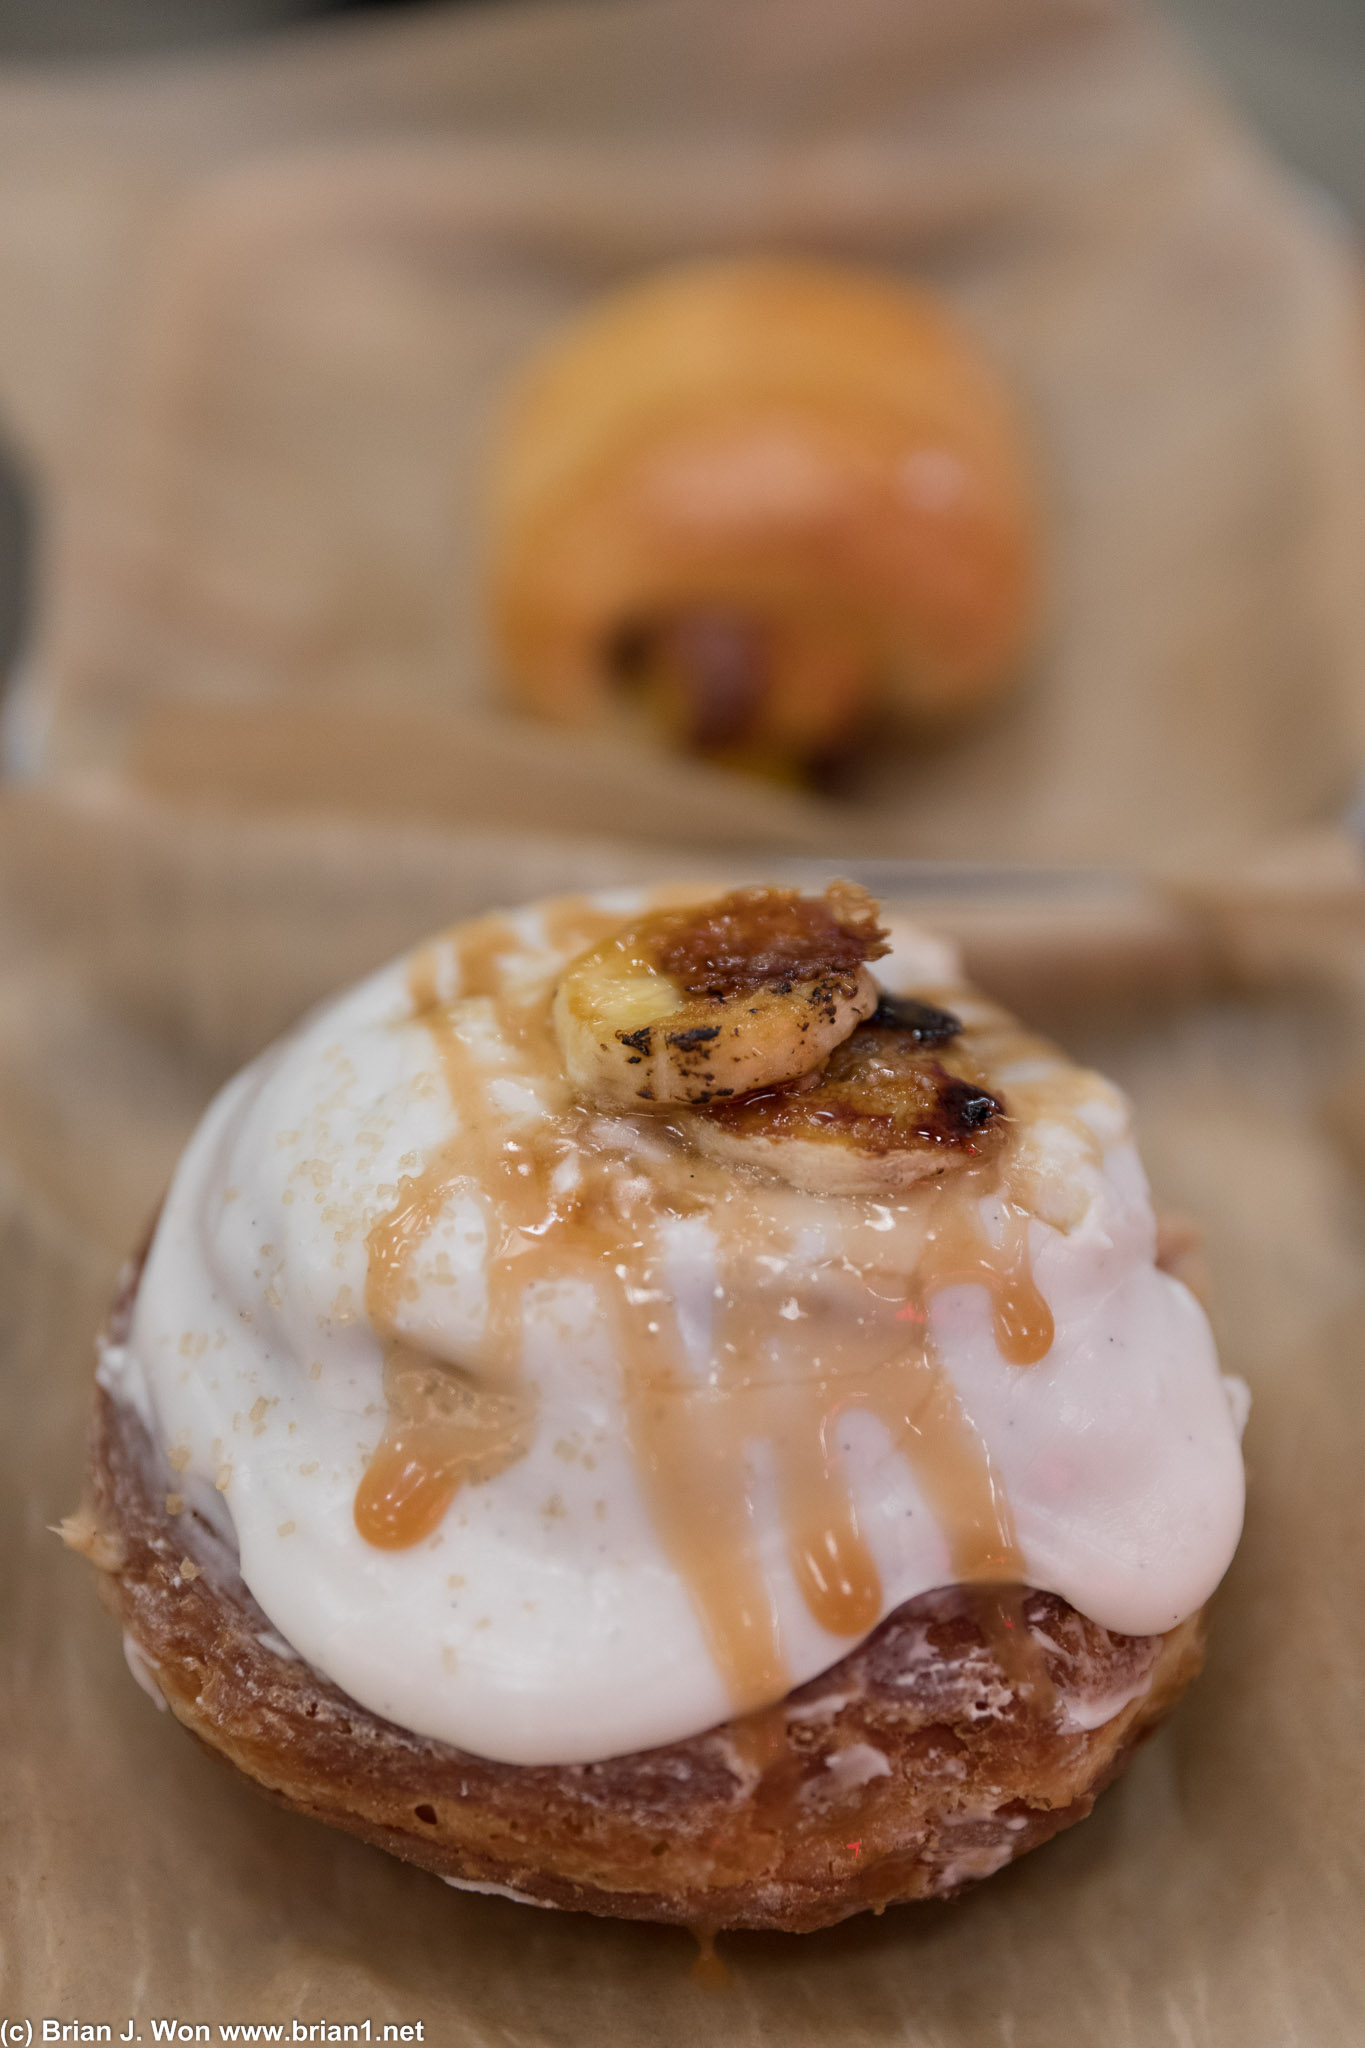 Bananas foster donut. Yes, it's ridiculous.